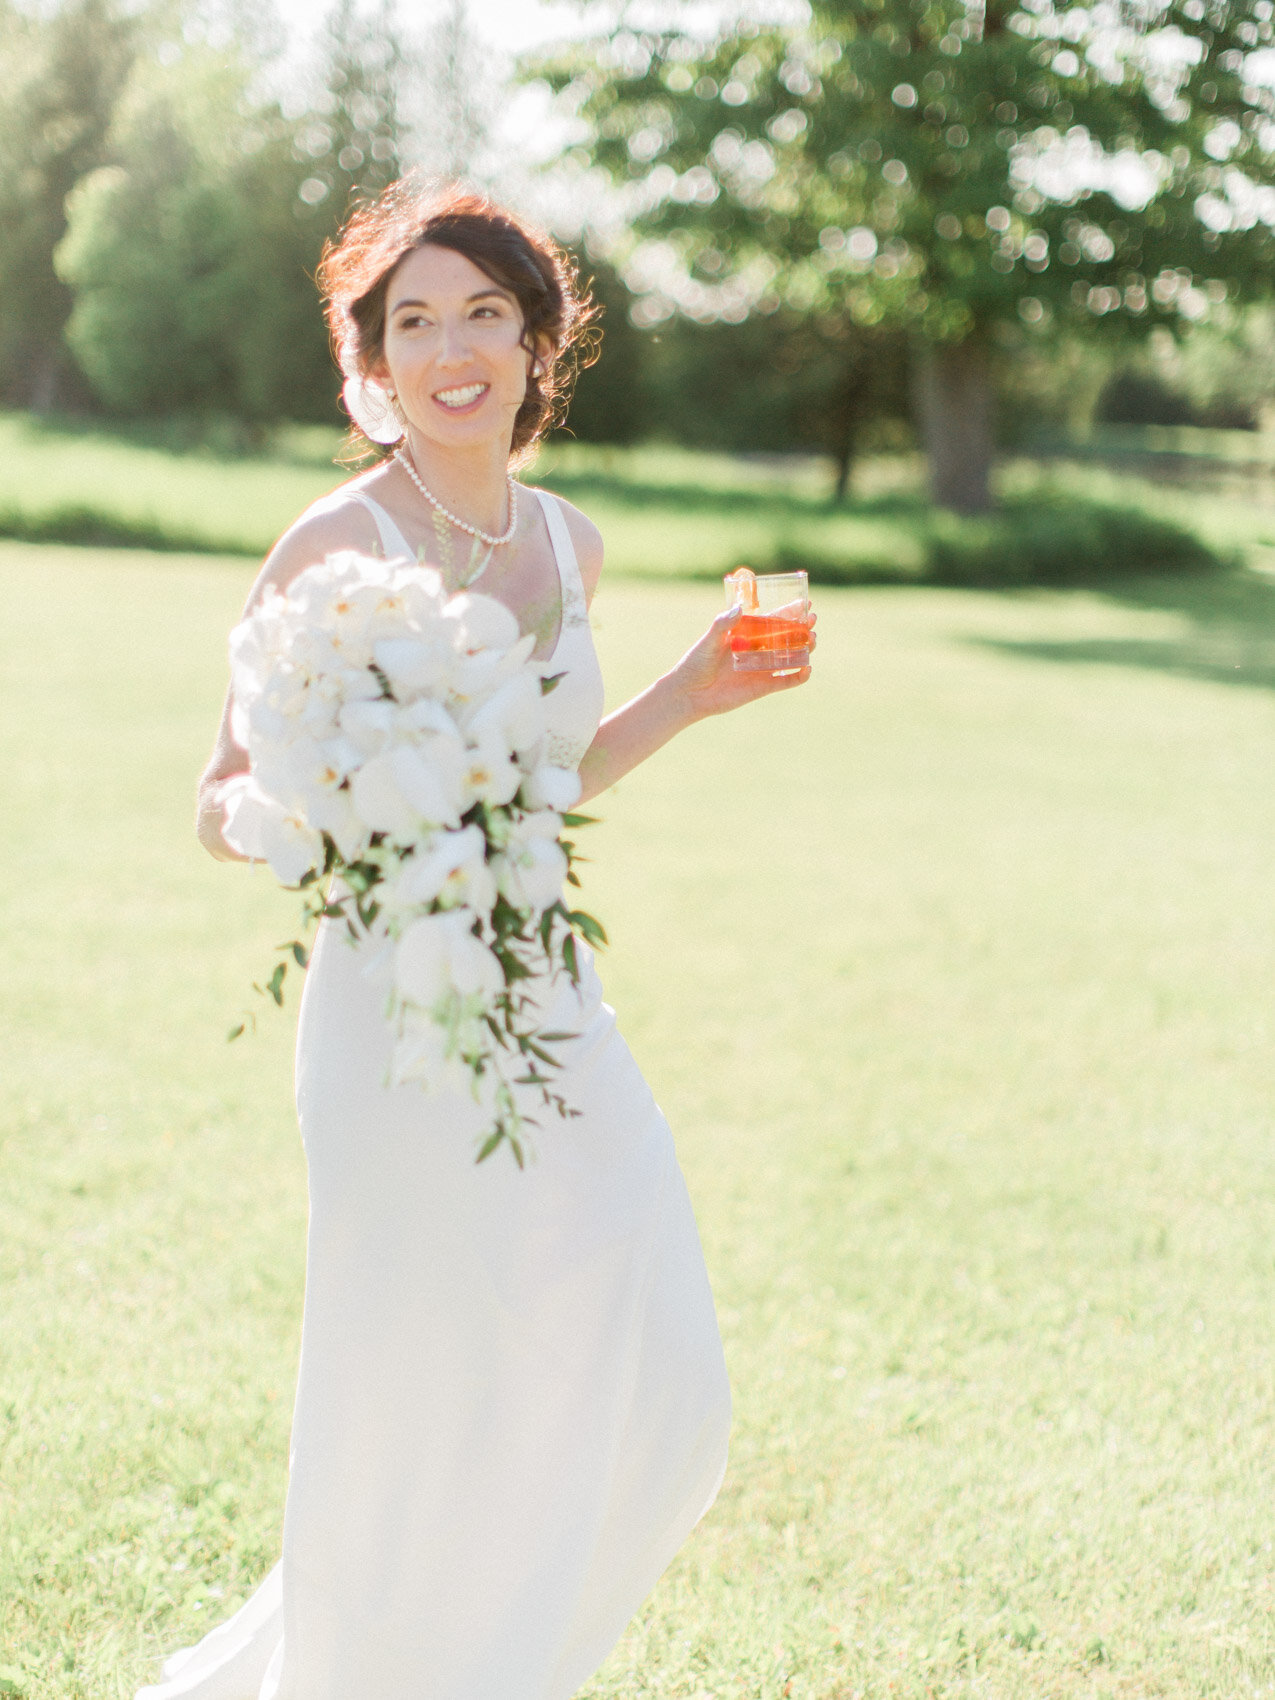 chic bridal style in a simple slip dress with a bouquet of white orchids